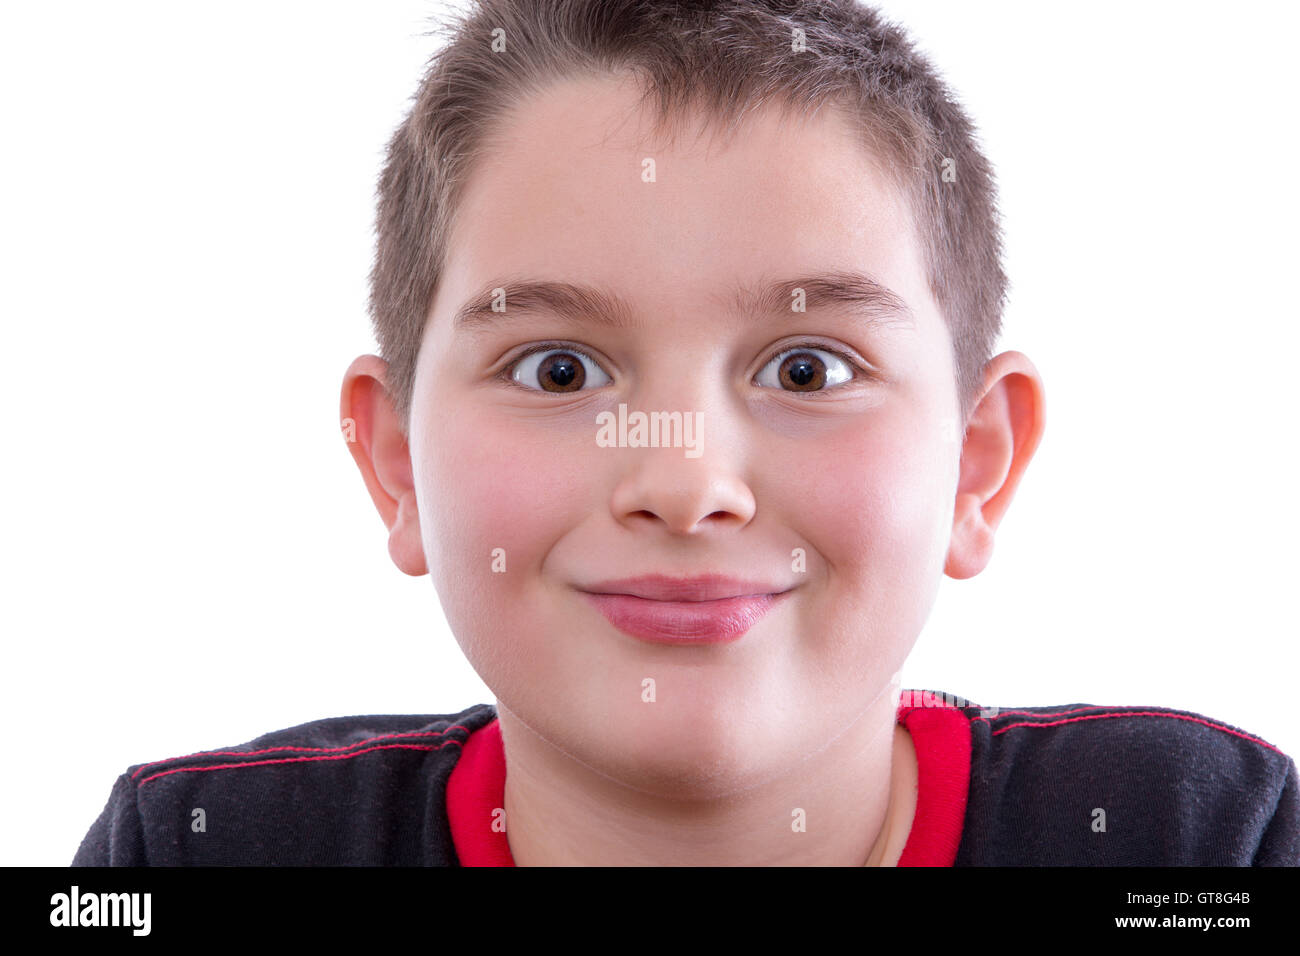 Head and Shoulders Close Up Portrait of Young Boy Wearing Black and Red Shirt Looking at Camera with Wide Eyes and Closed Mouth Stock Photo